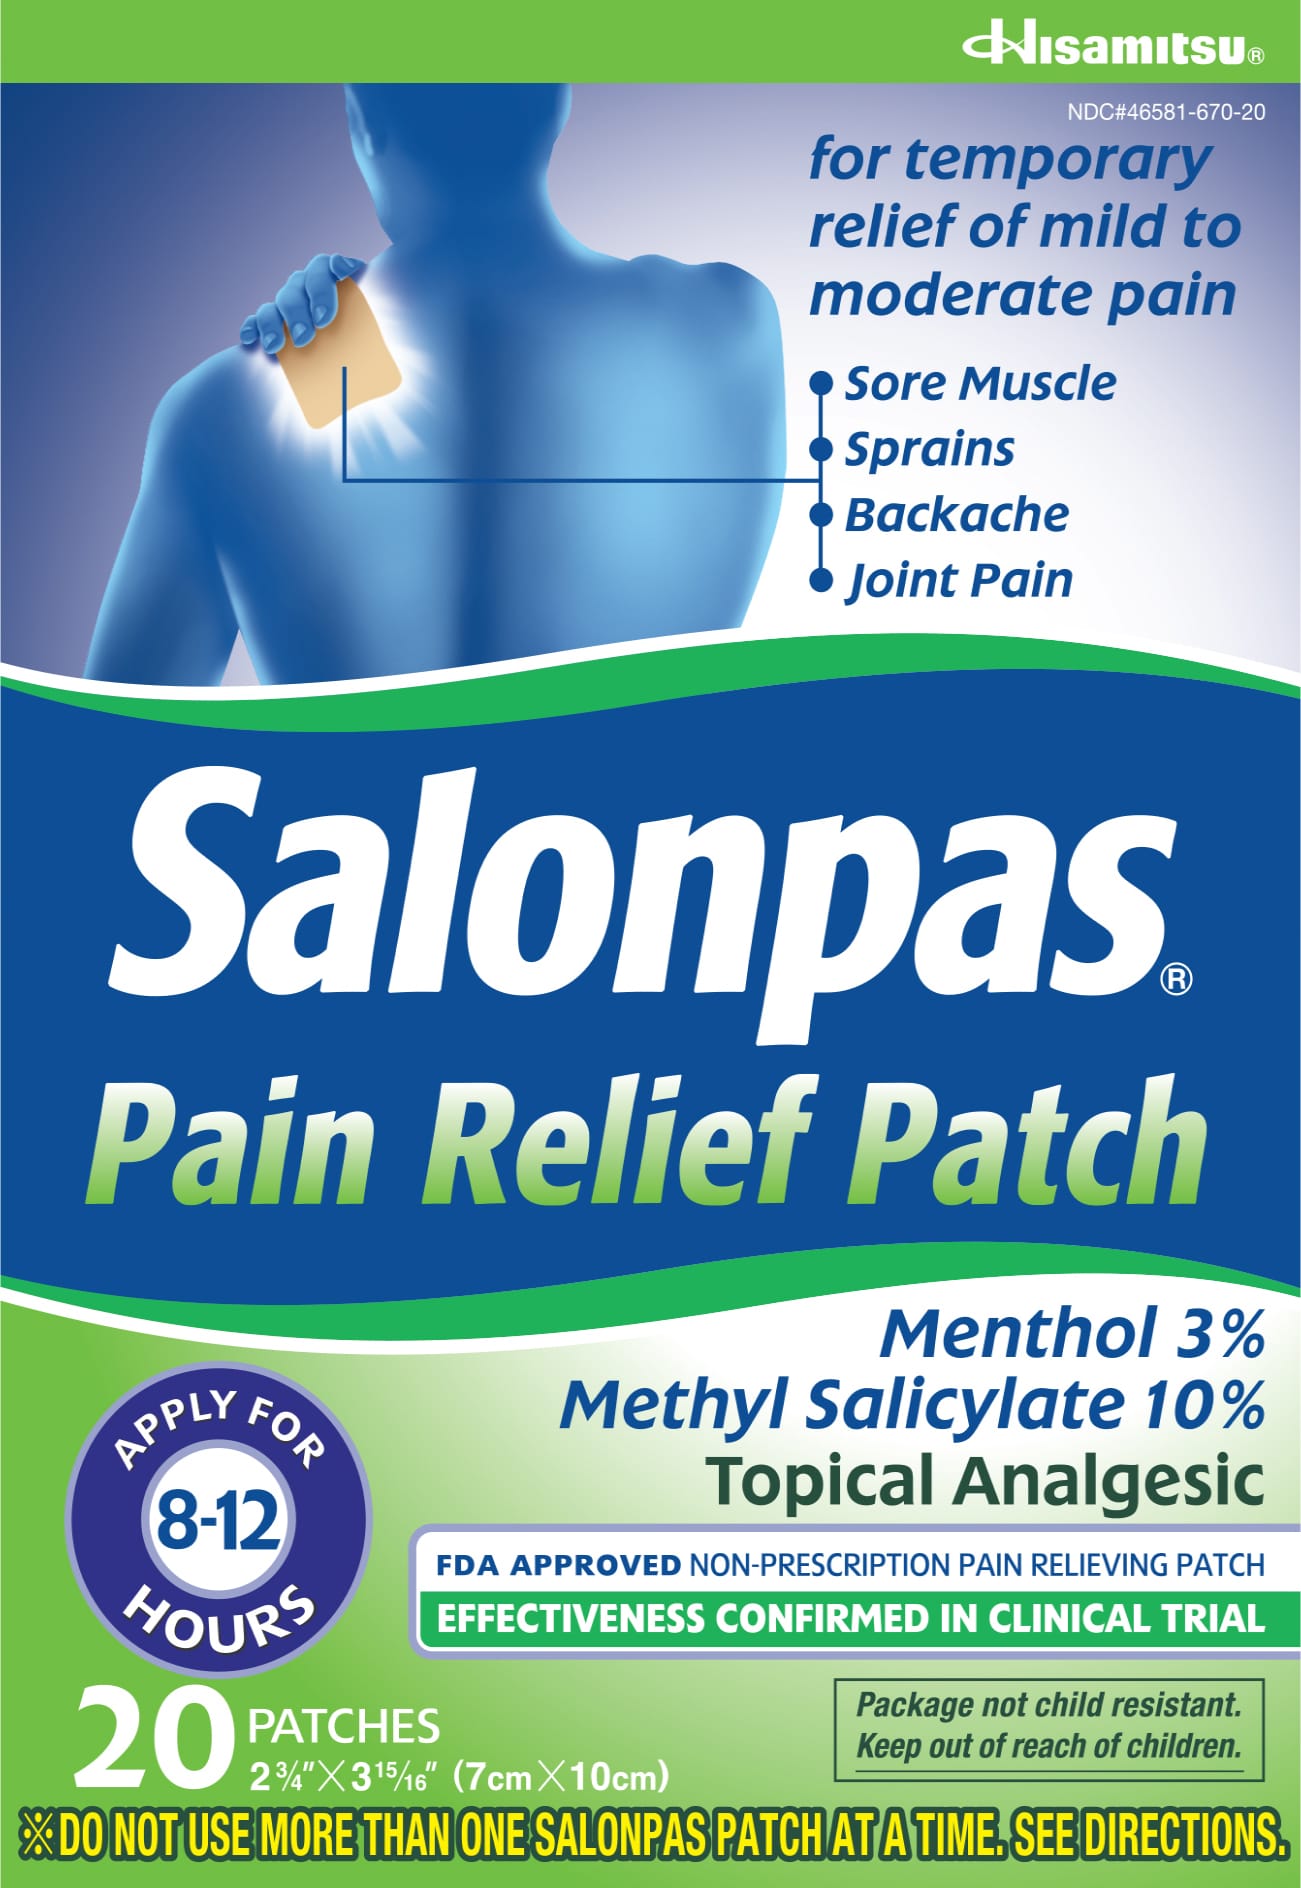 https://us.hisamitsu/img/product/pain-relief-patch-20ct-front.jpg